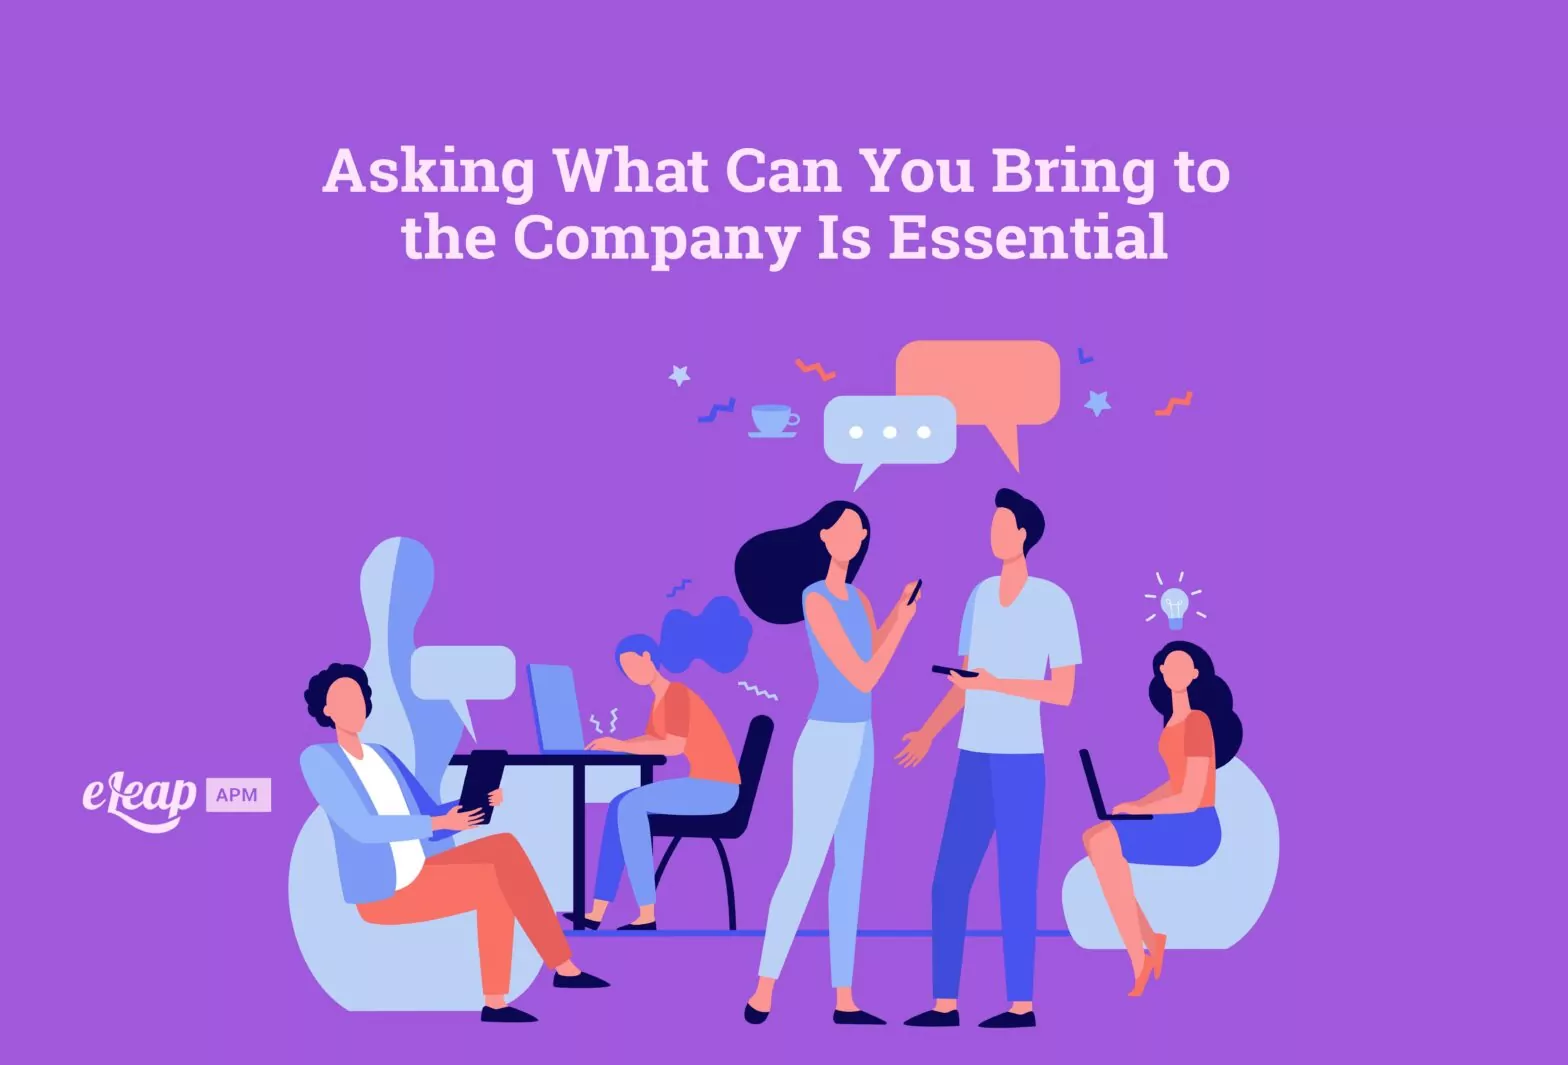 Asking What Can You Bring to the Company Is Essential